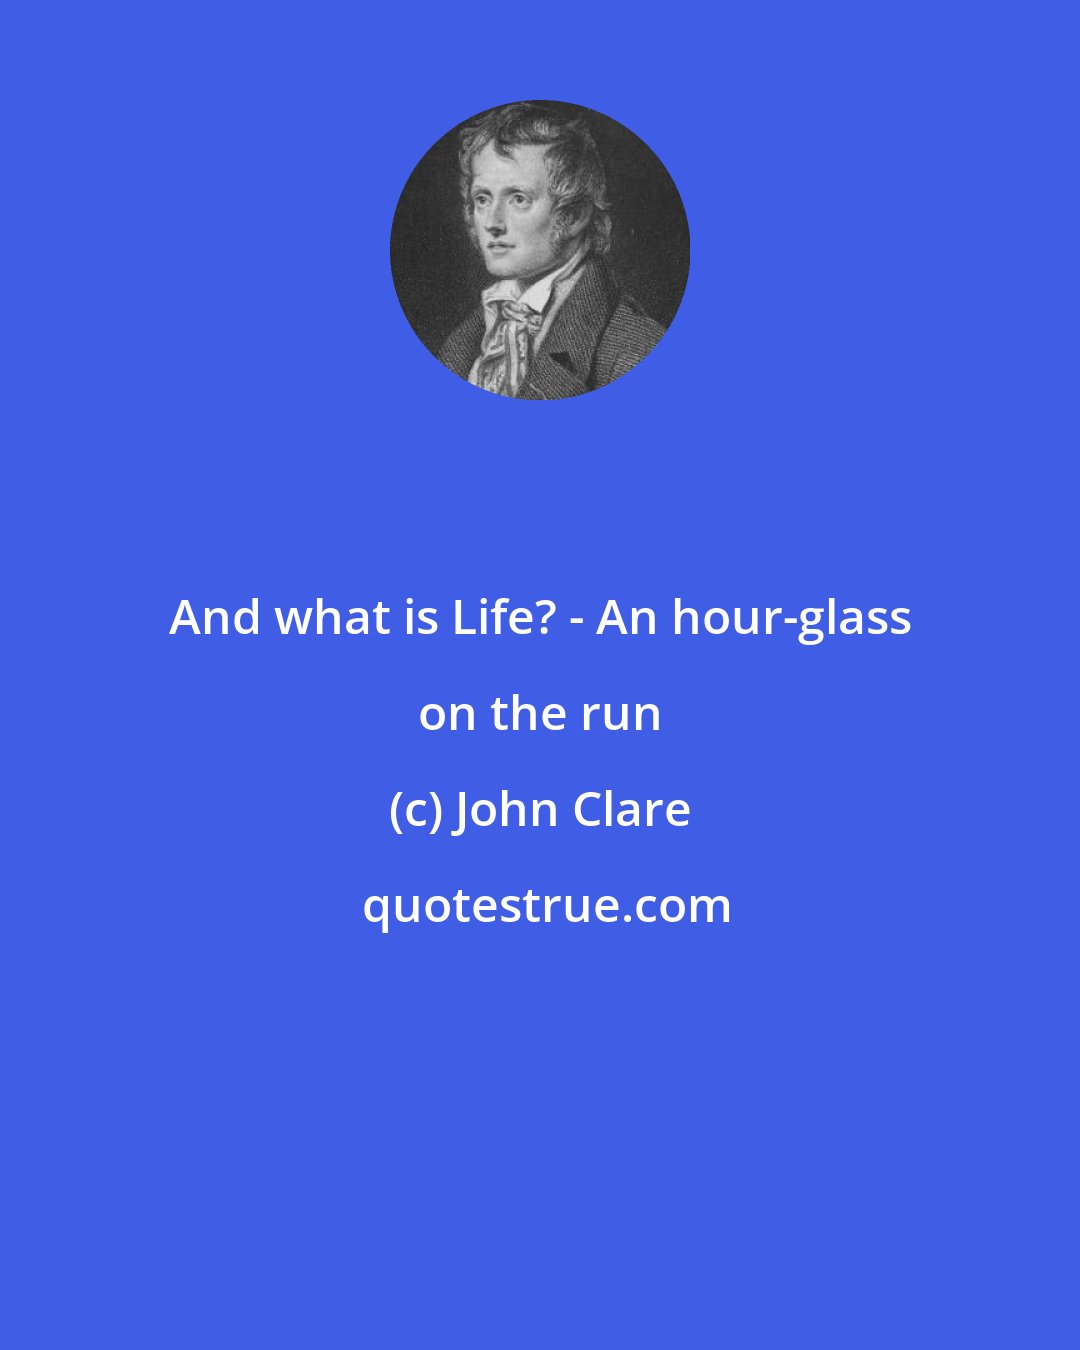 John Clare: And what is Life? - An hour-glass on the run